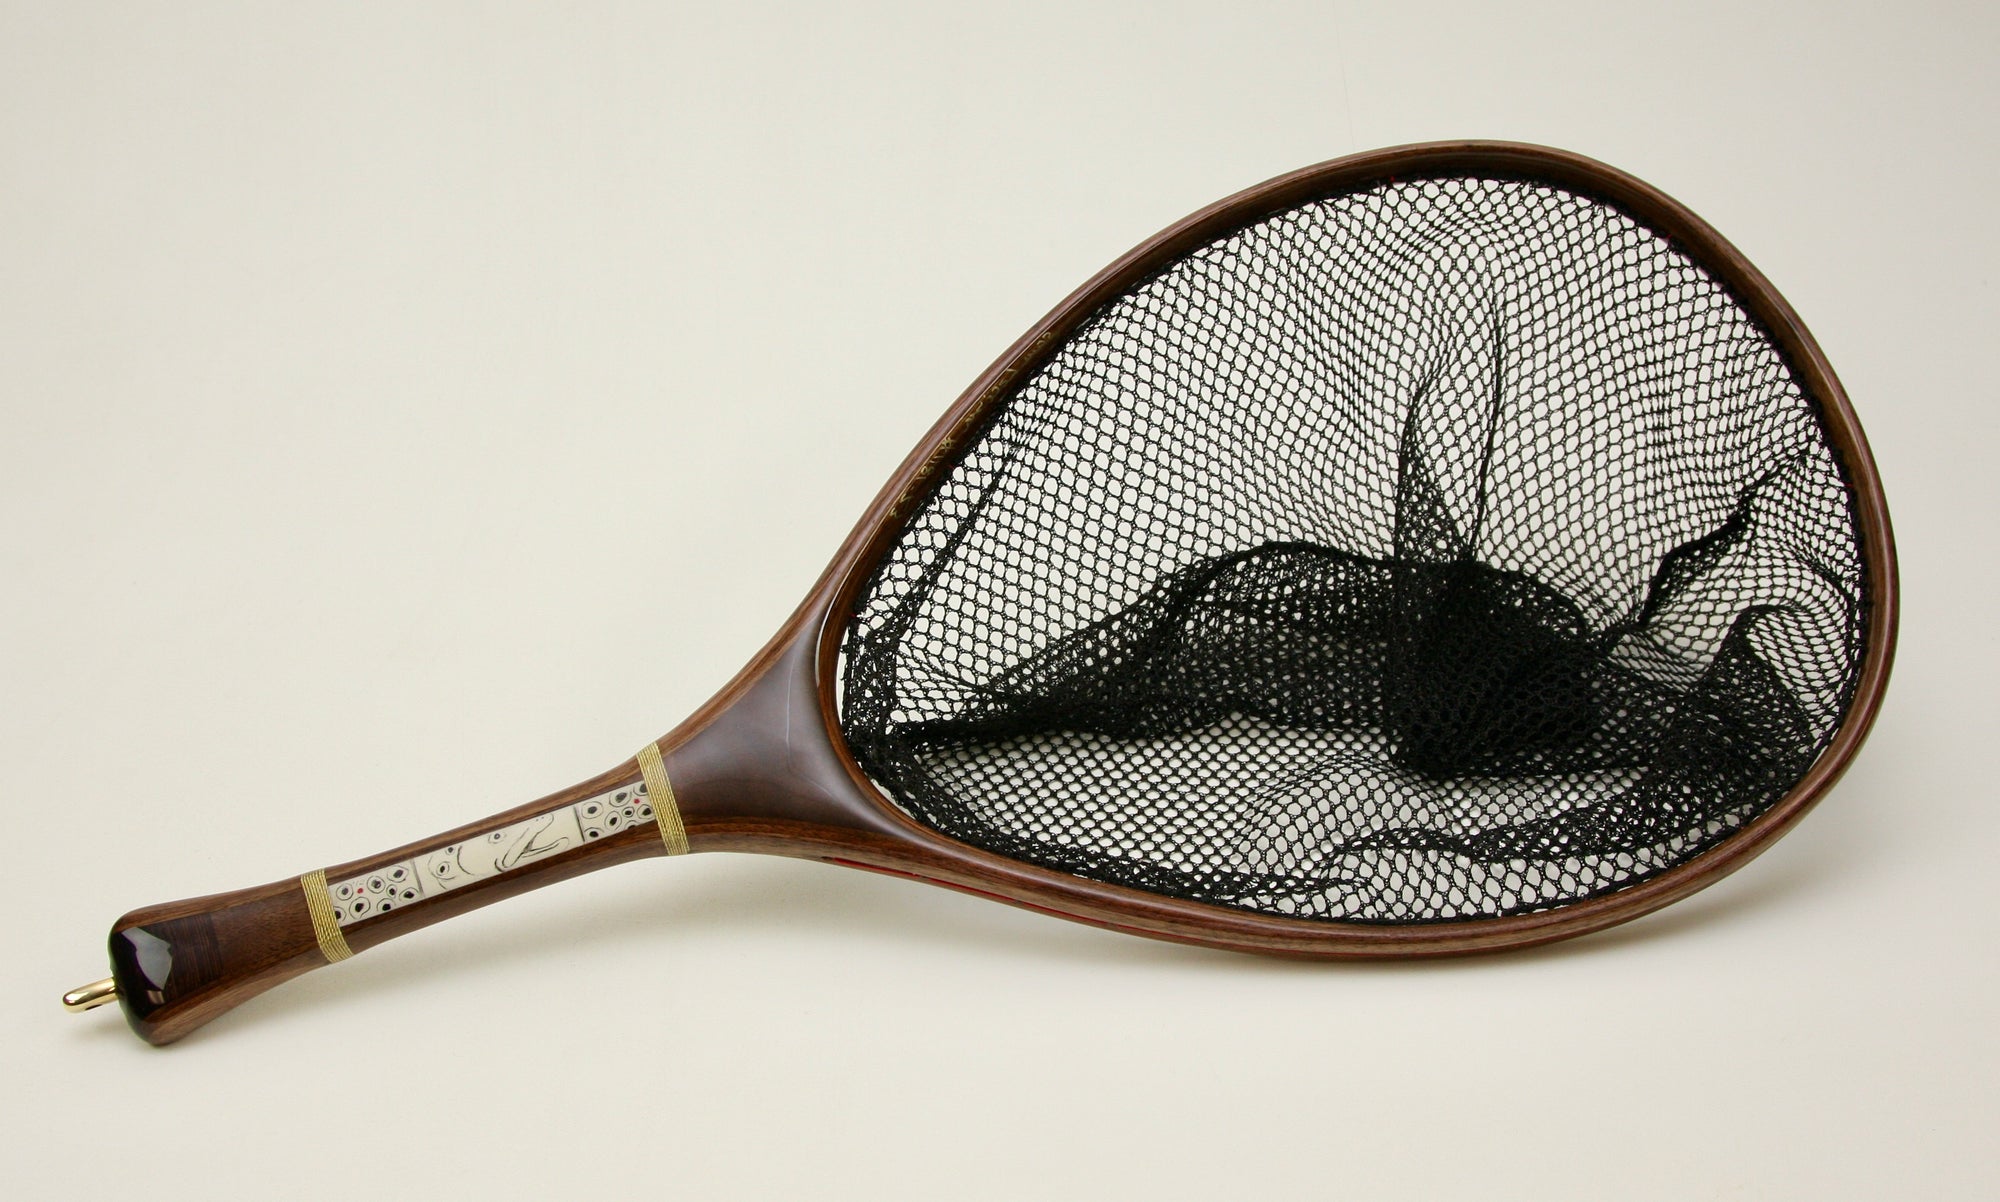 Medium sized Fly Fishing Landing Net with Deer Antler and Walnut